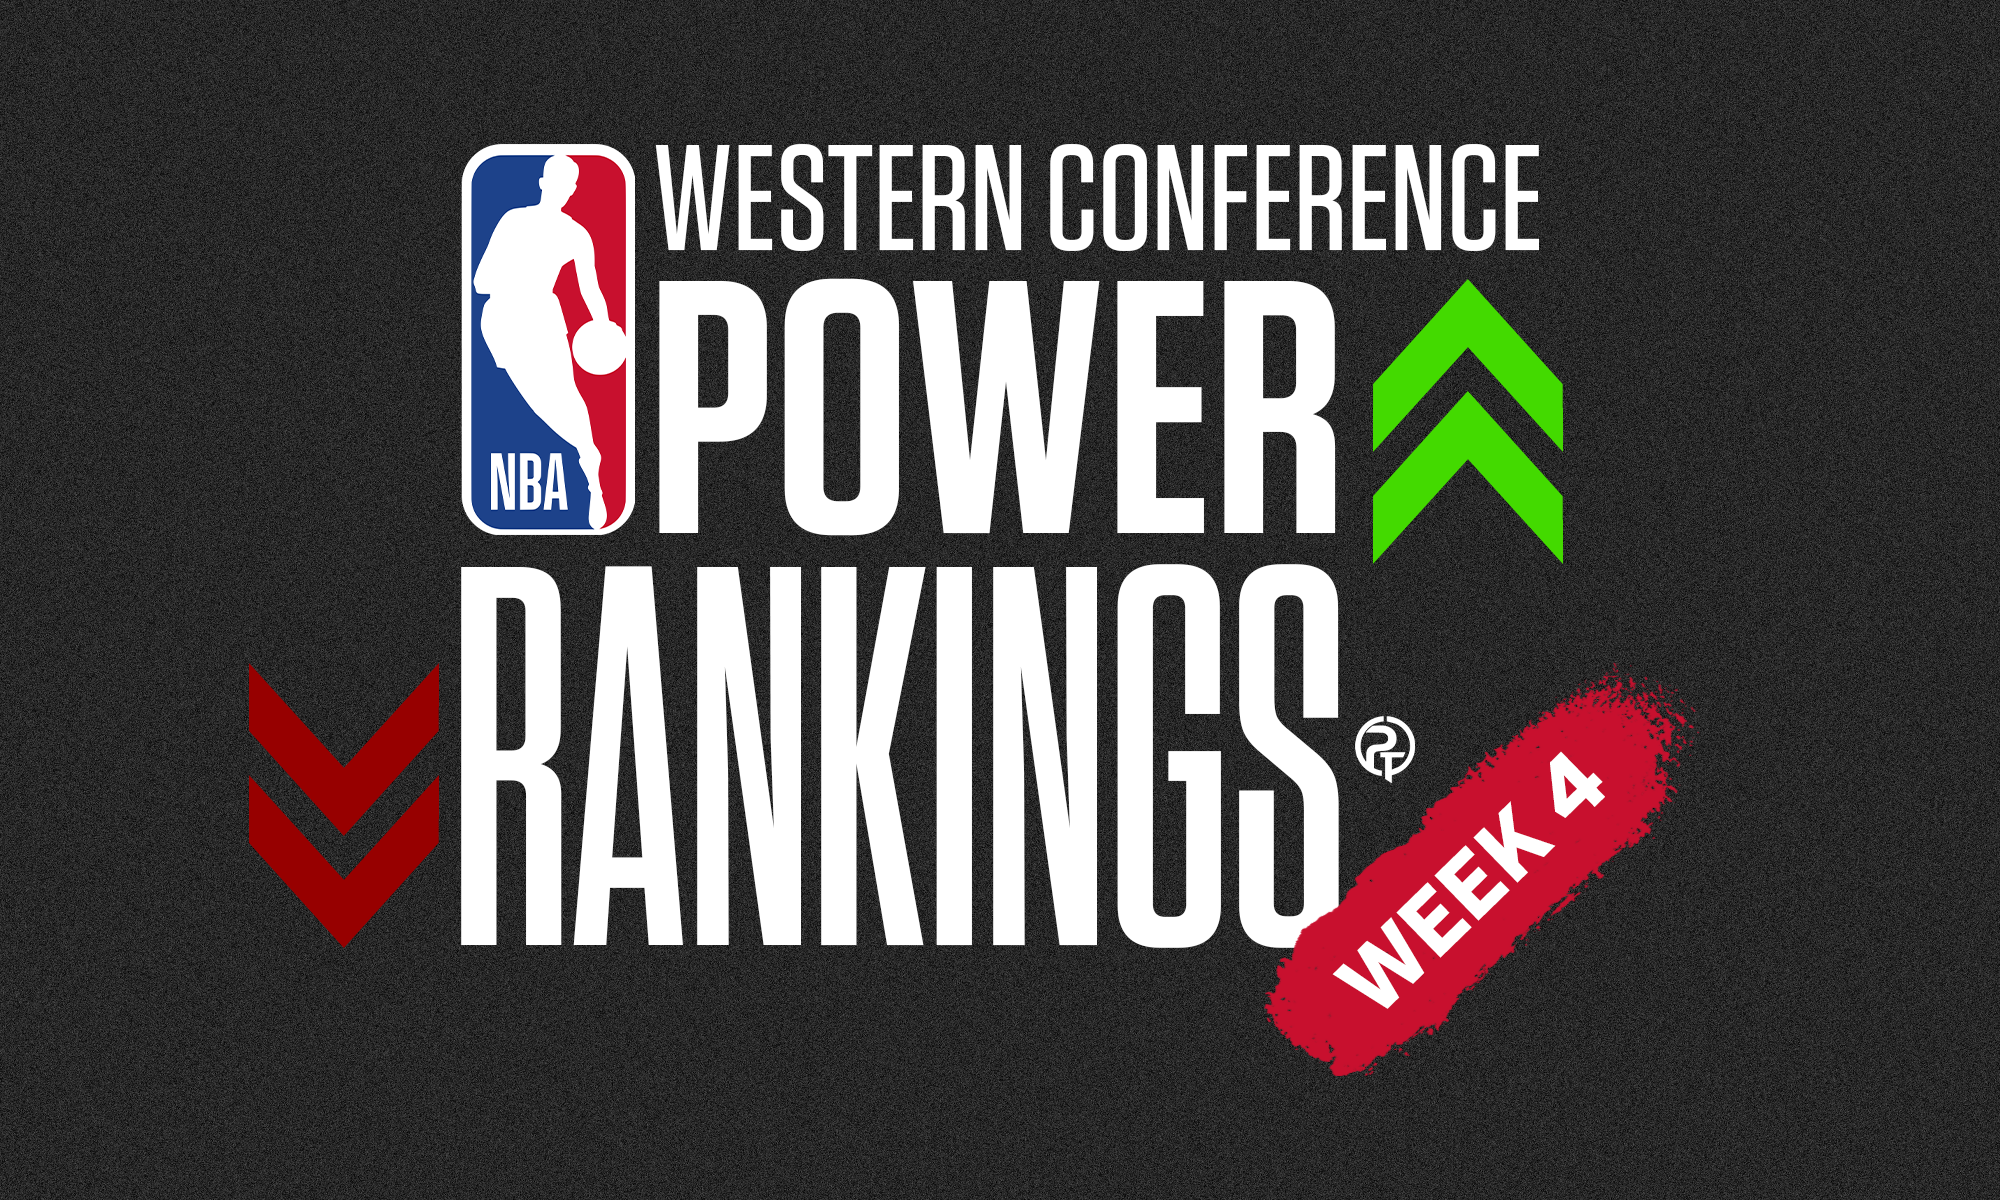 NBA Western Conference Power Rankings